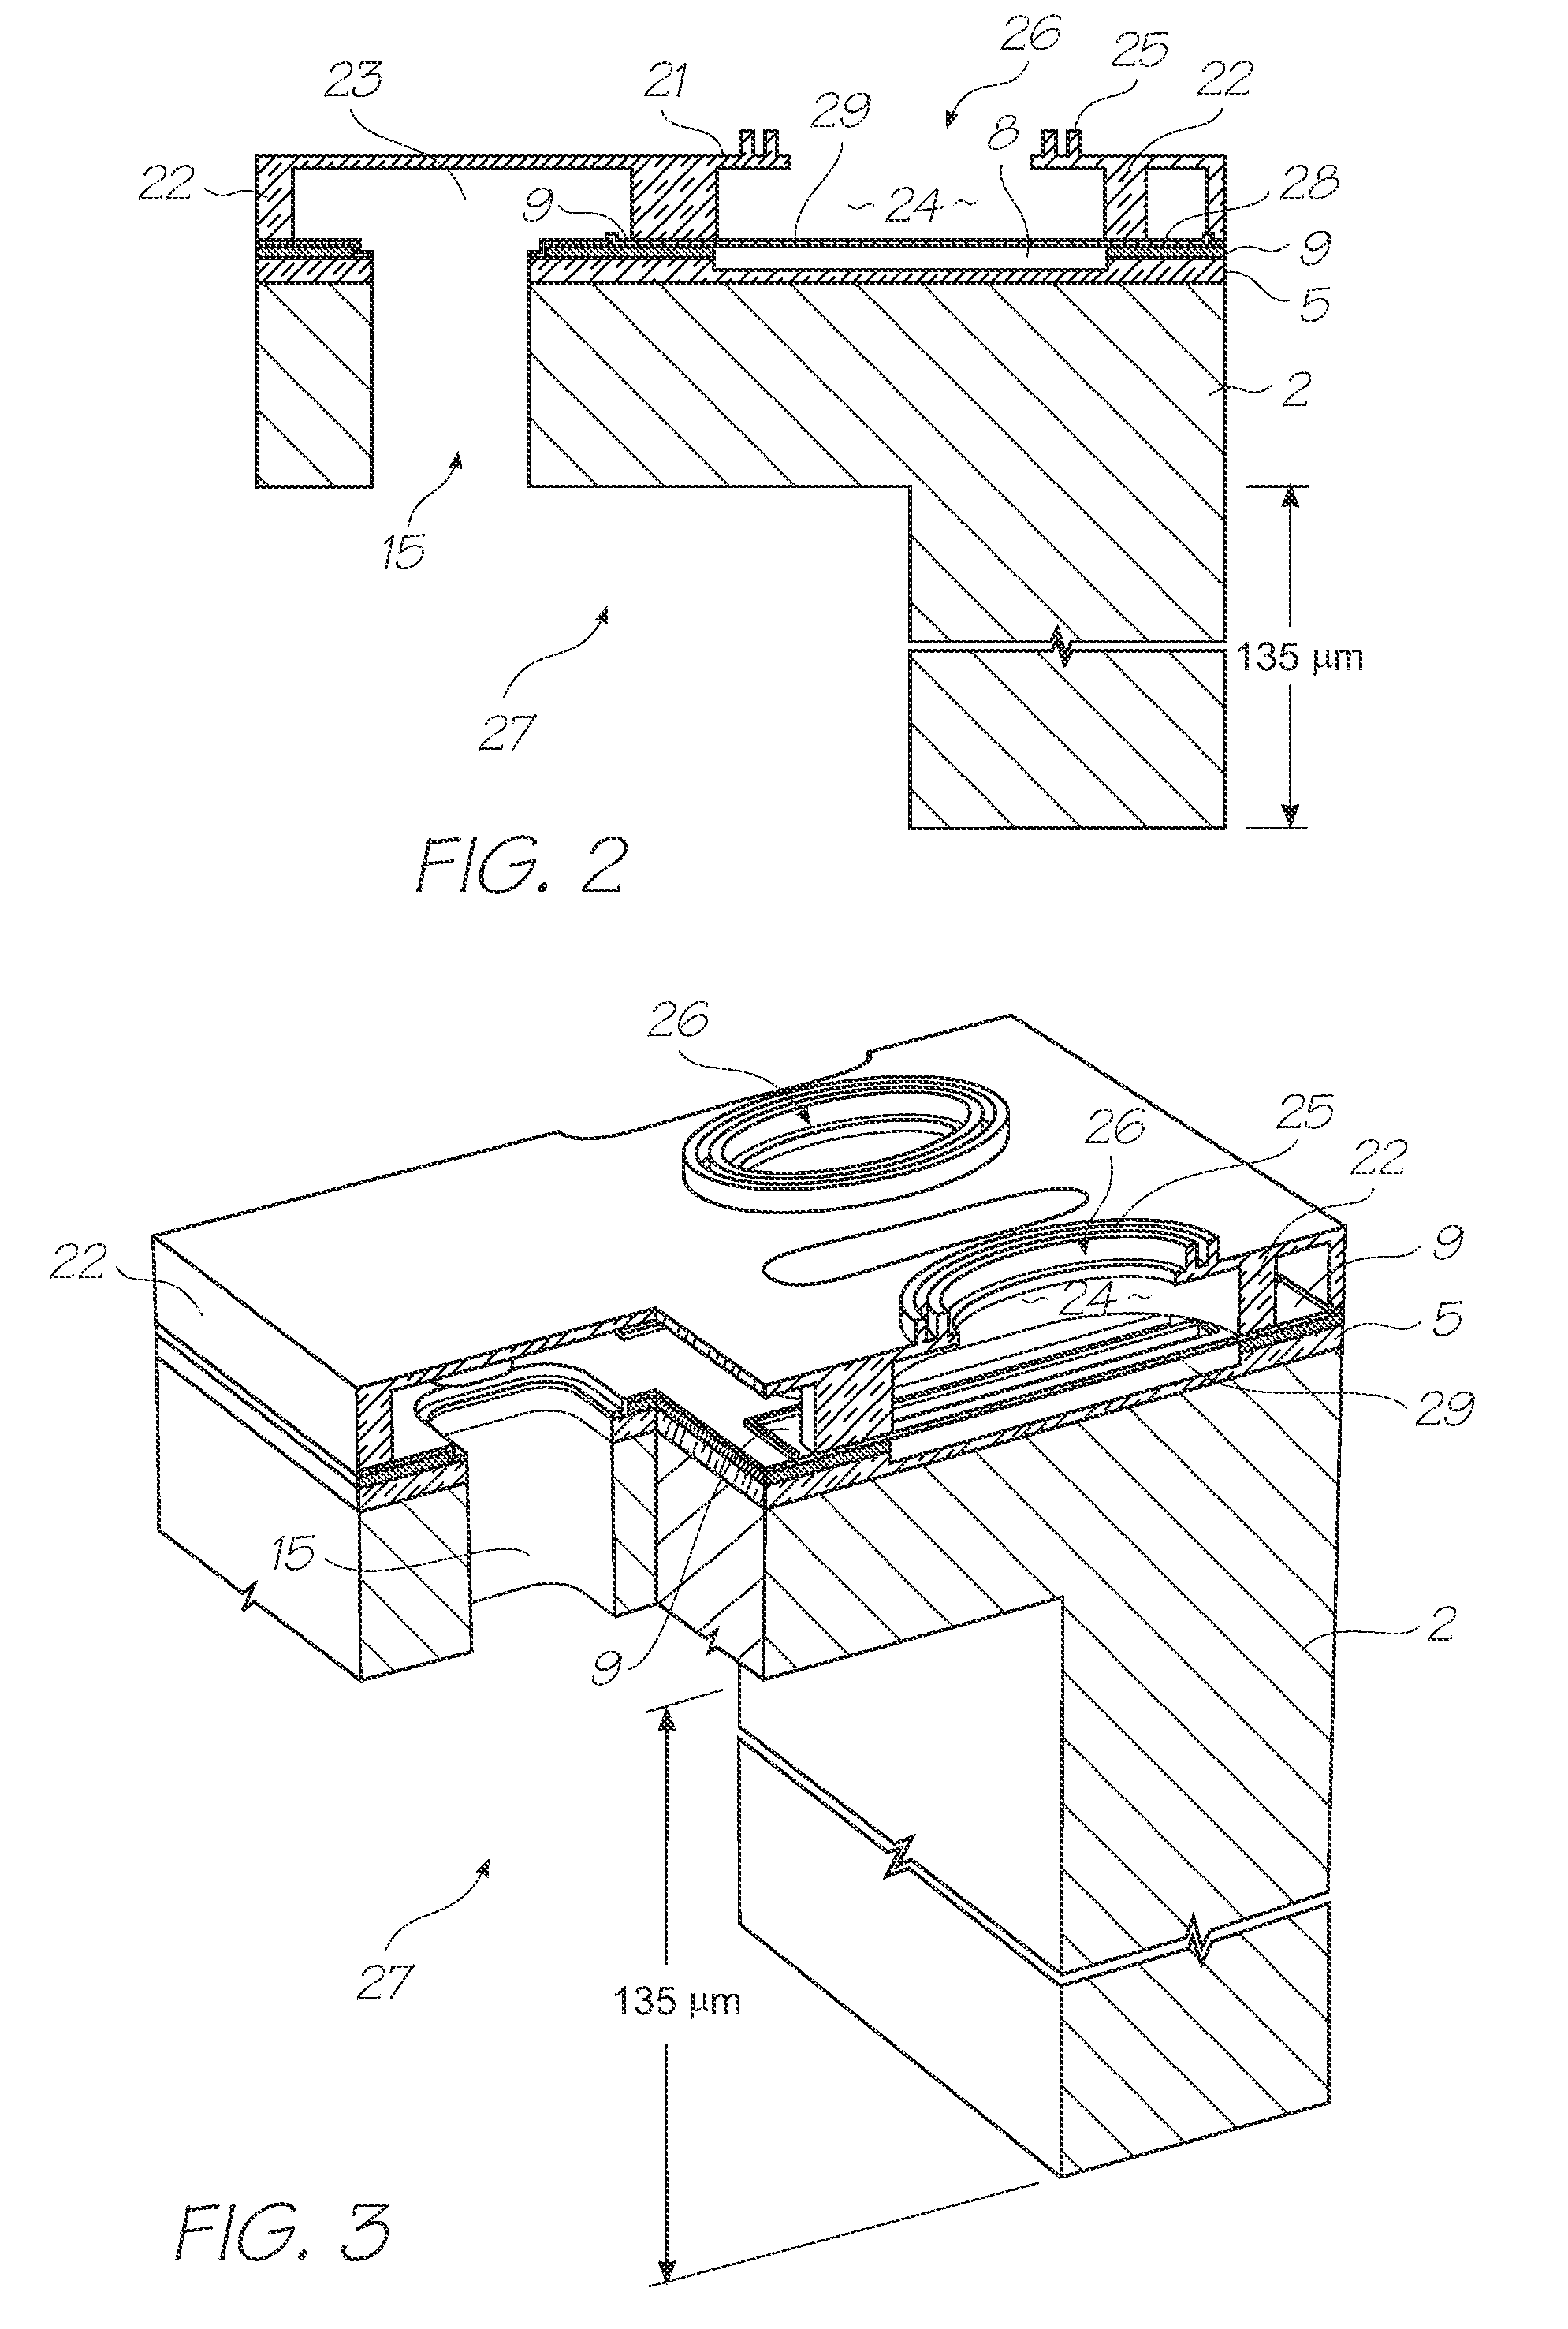 Printhead Integrated Circuit Comprising Polymeric Cover Layer